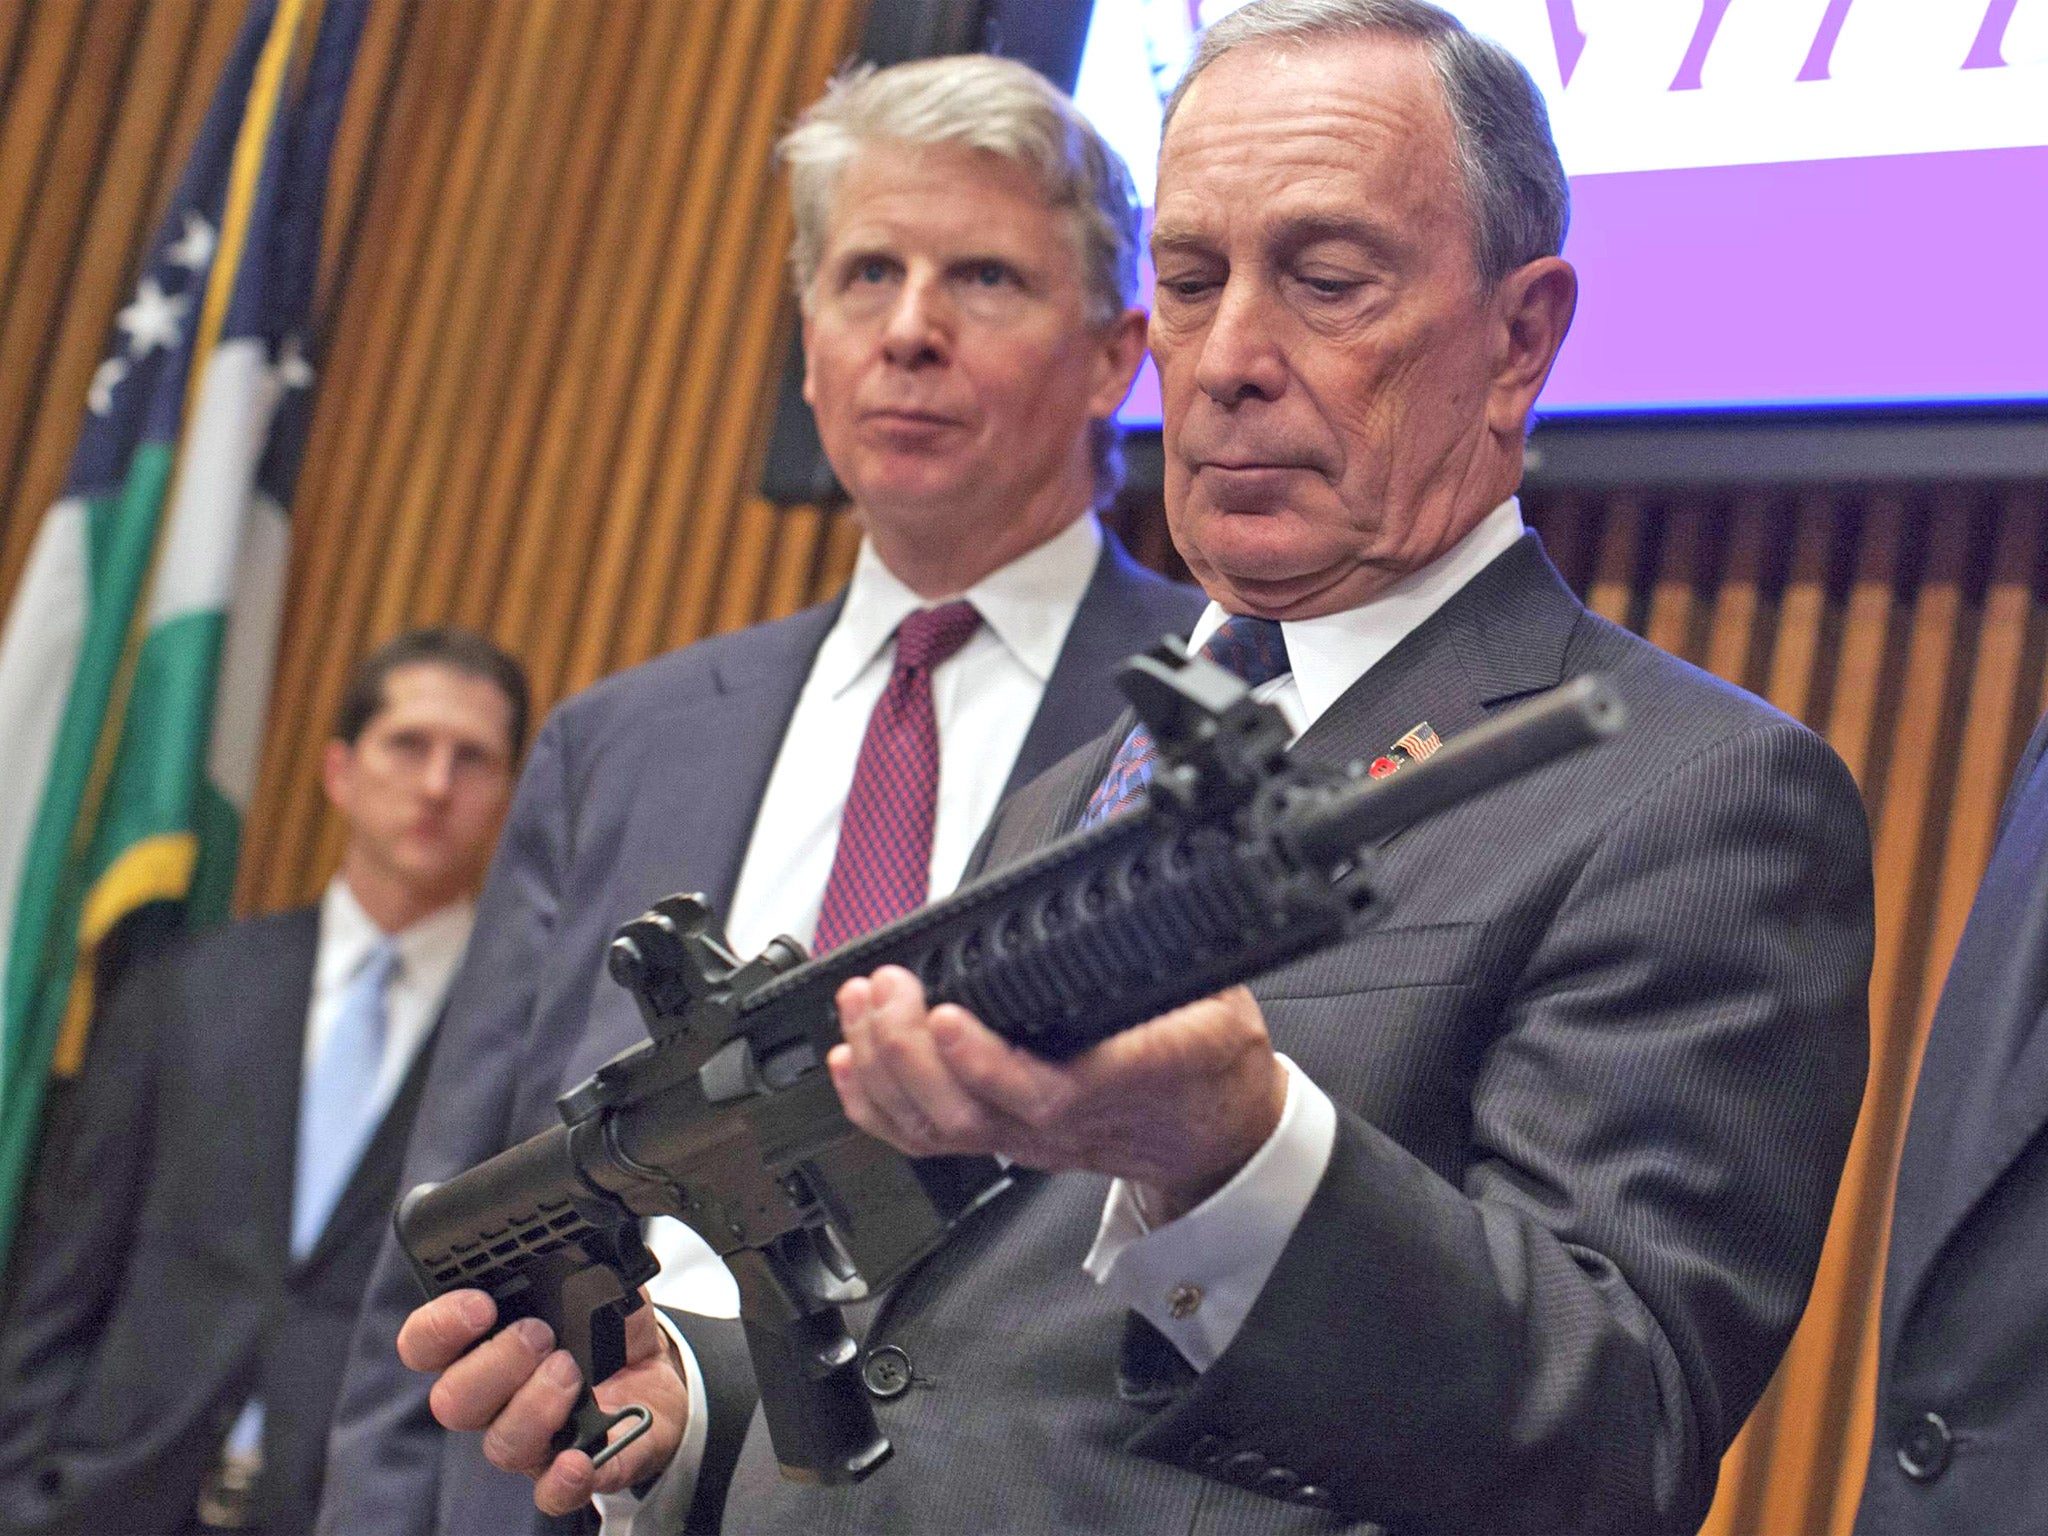 Michael Bloomberg examines a gun confiscated by police in New York during his term as the city’s mayor in 2012